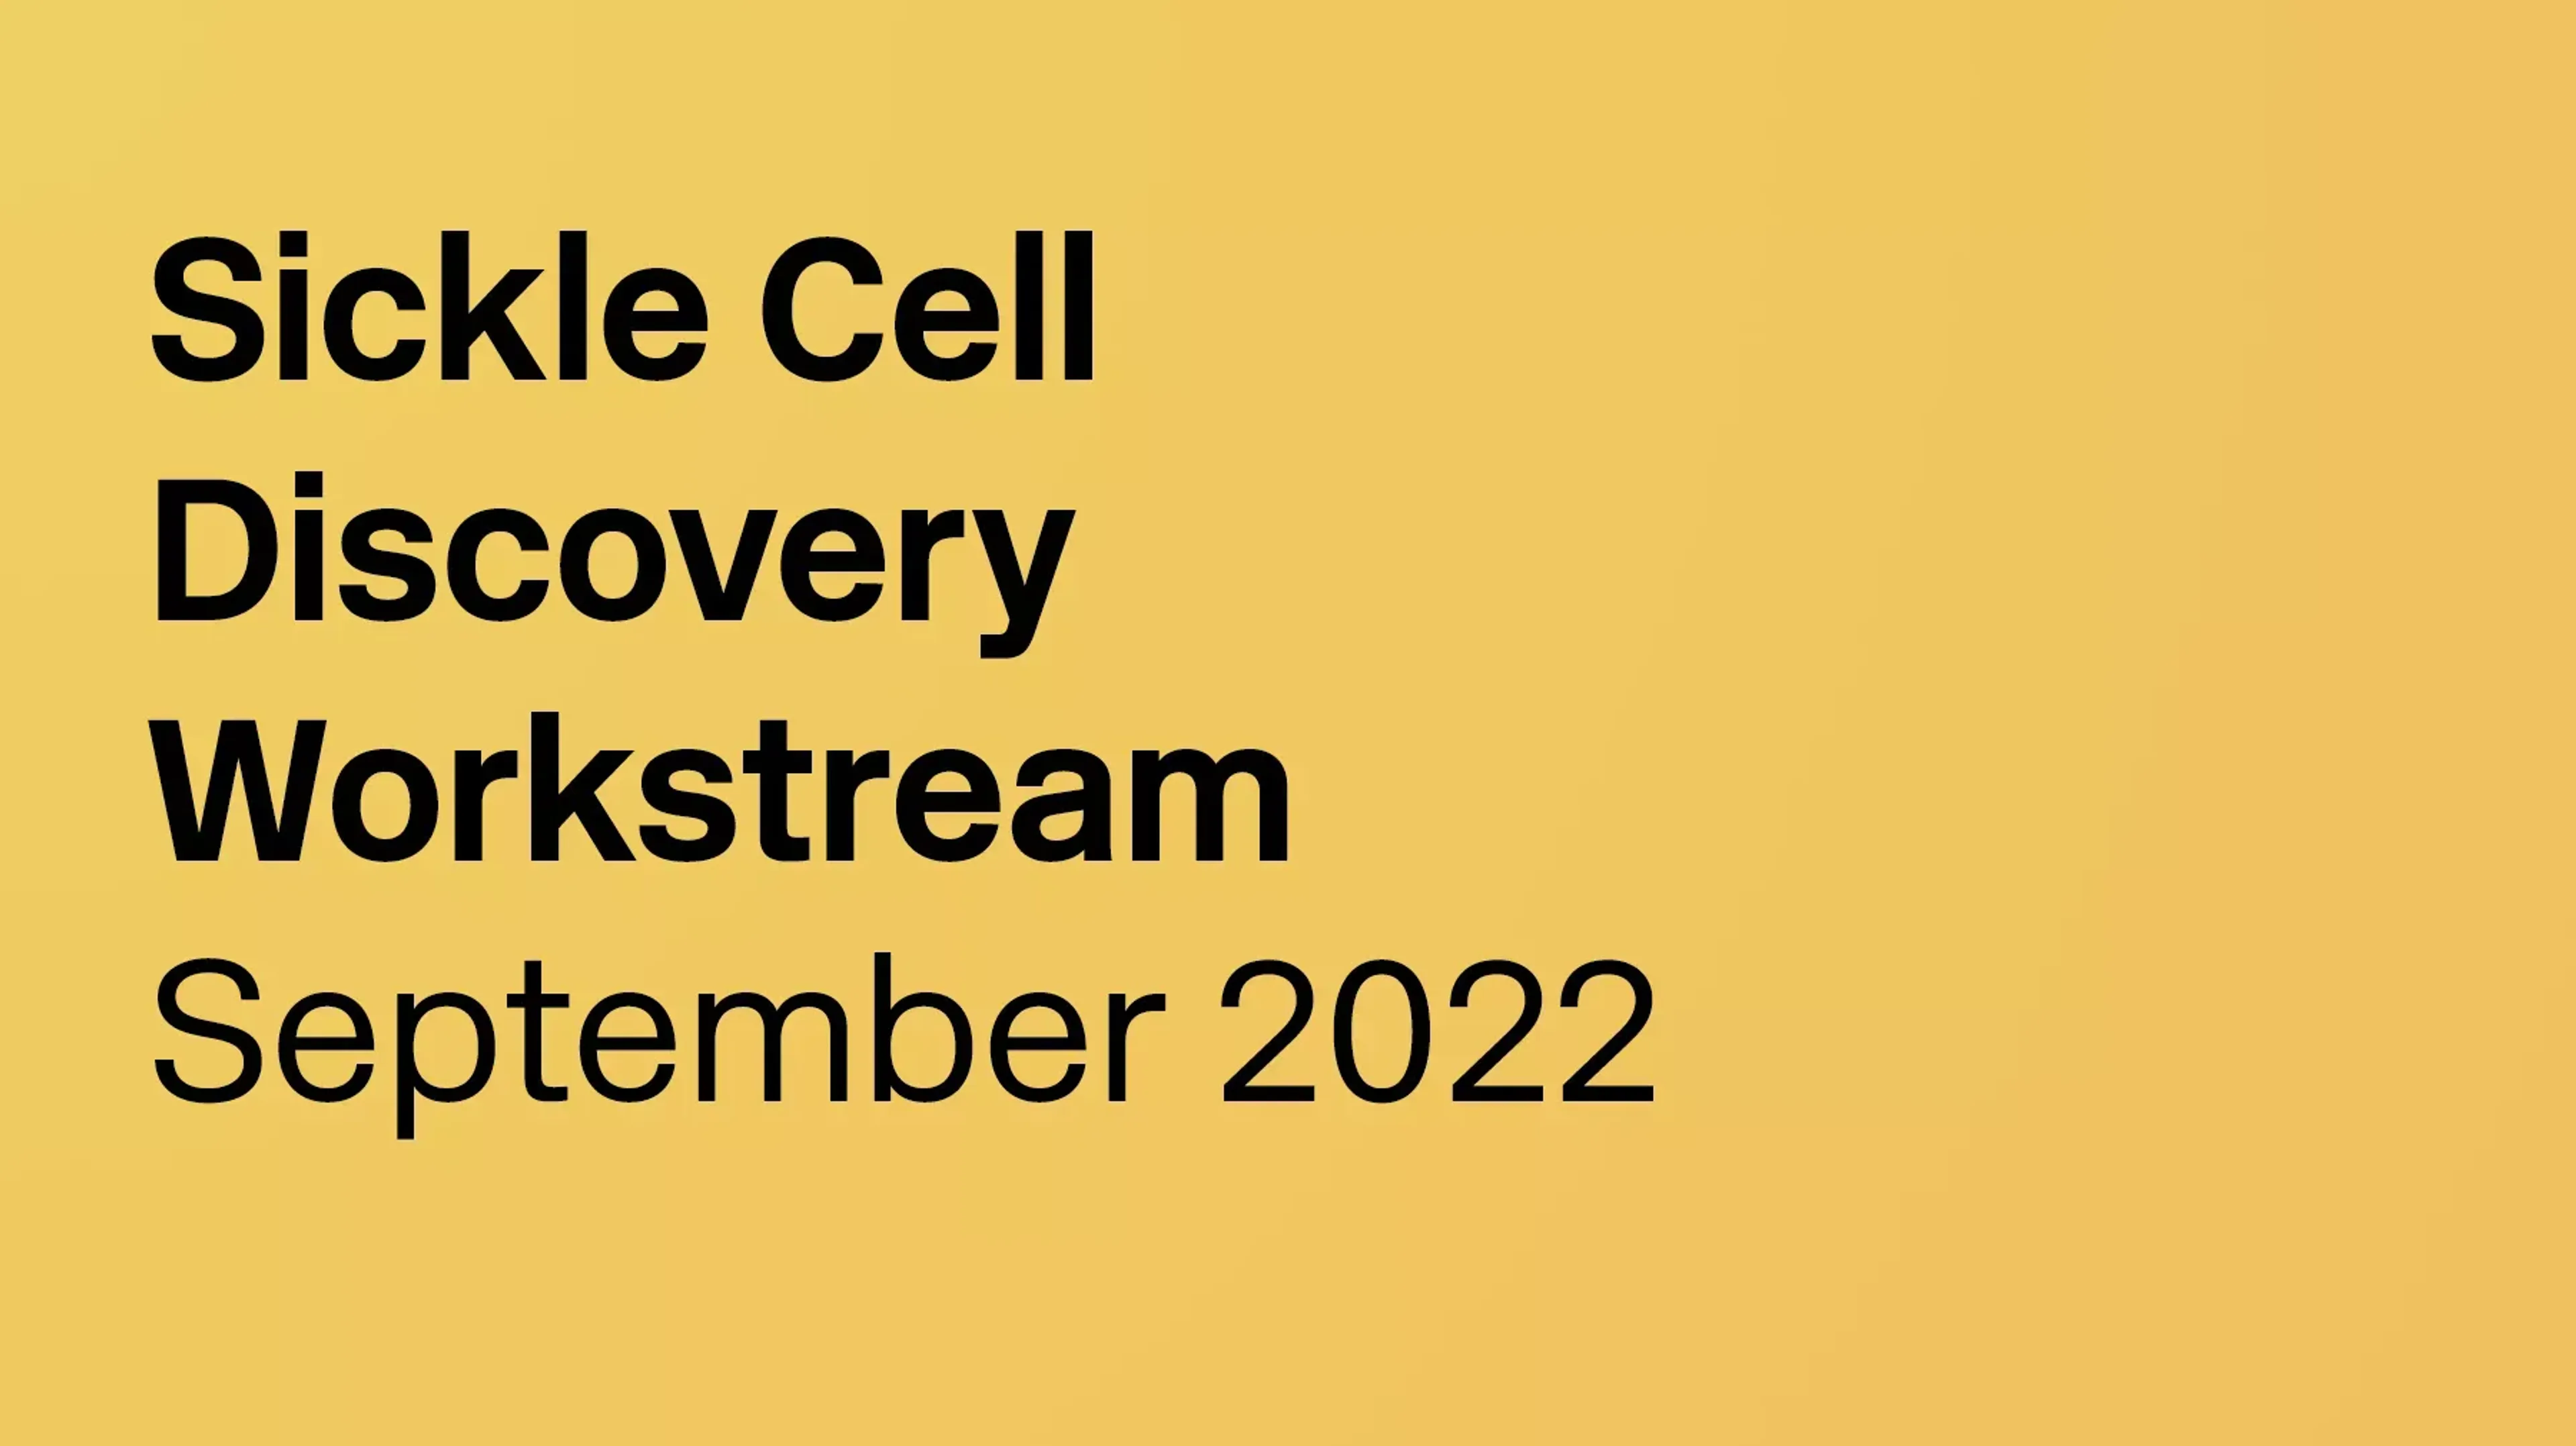 The words "Sickle Cell Digital Discovery Workstream September 2022" on a yellow background